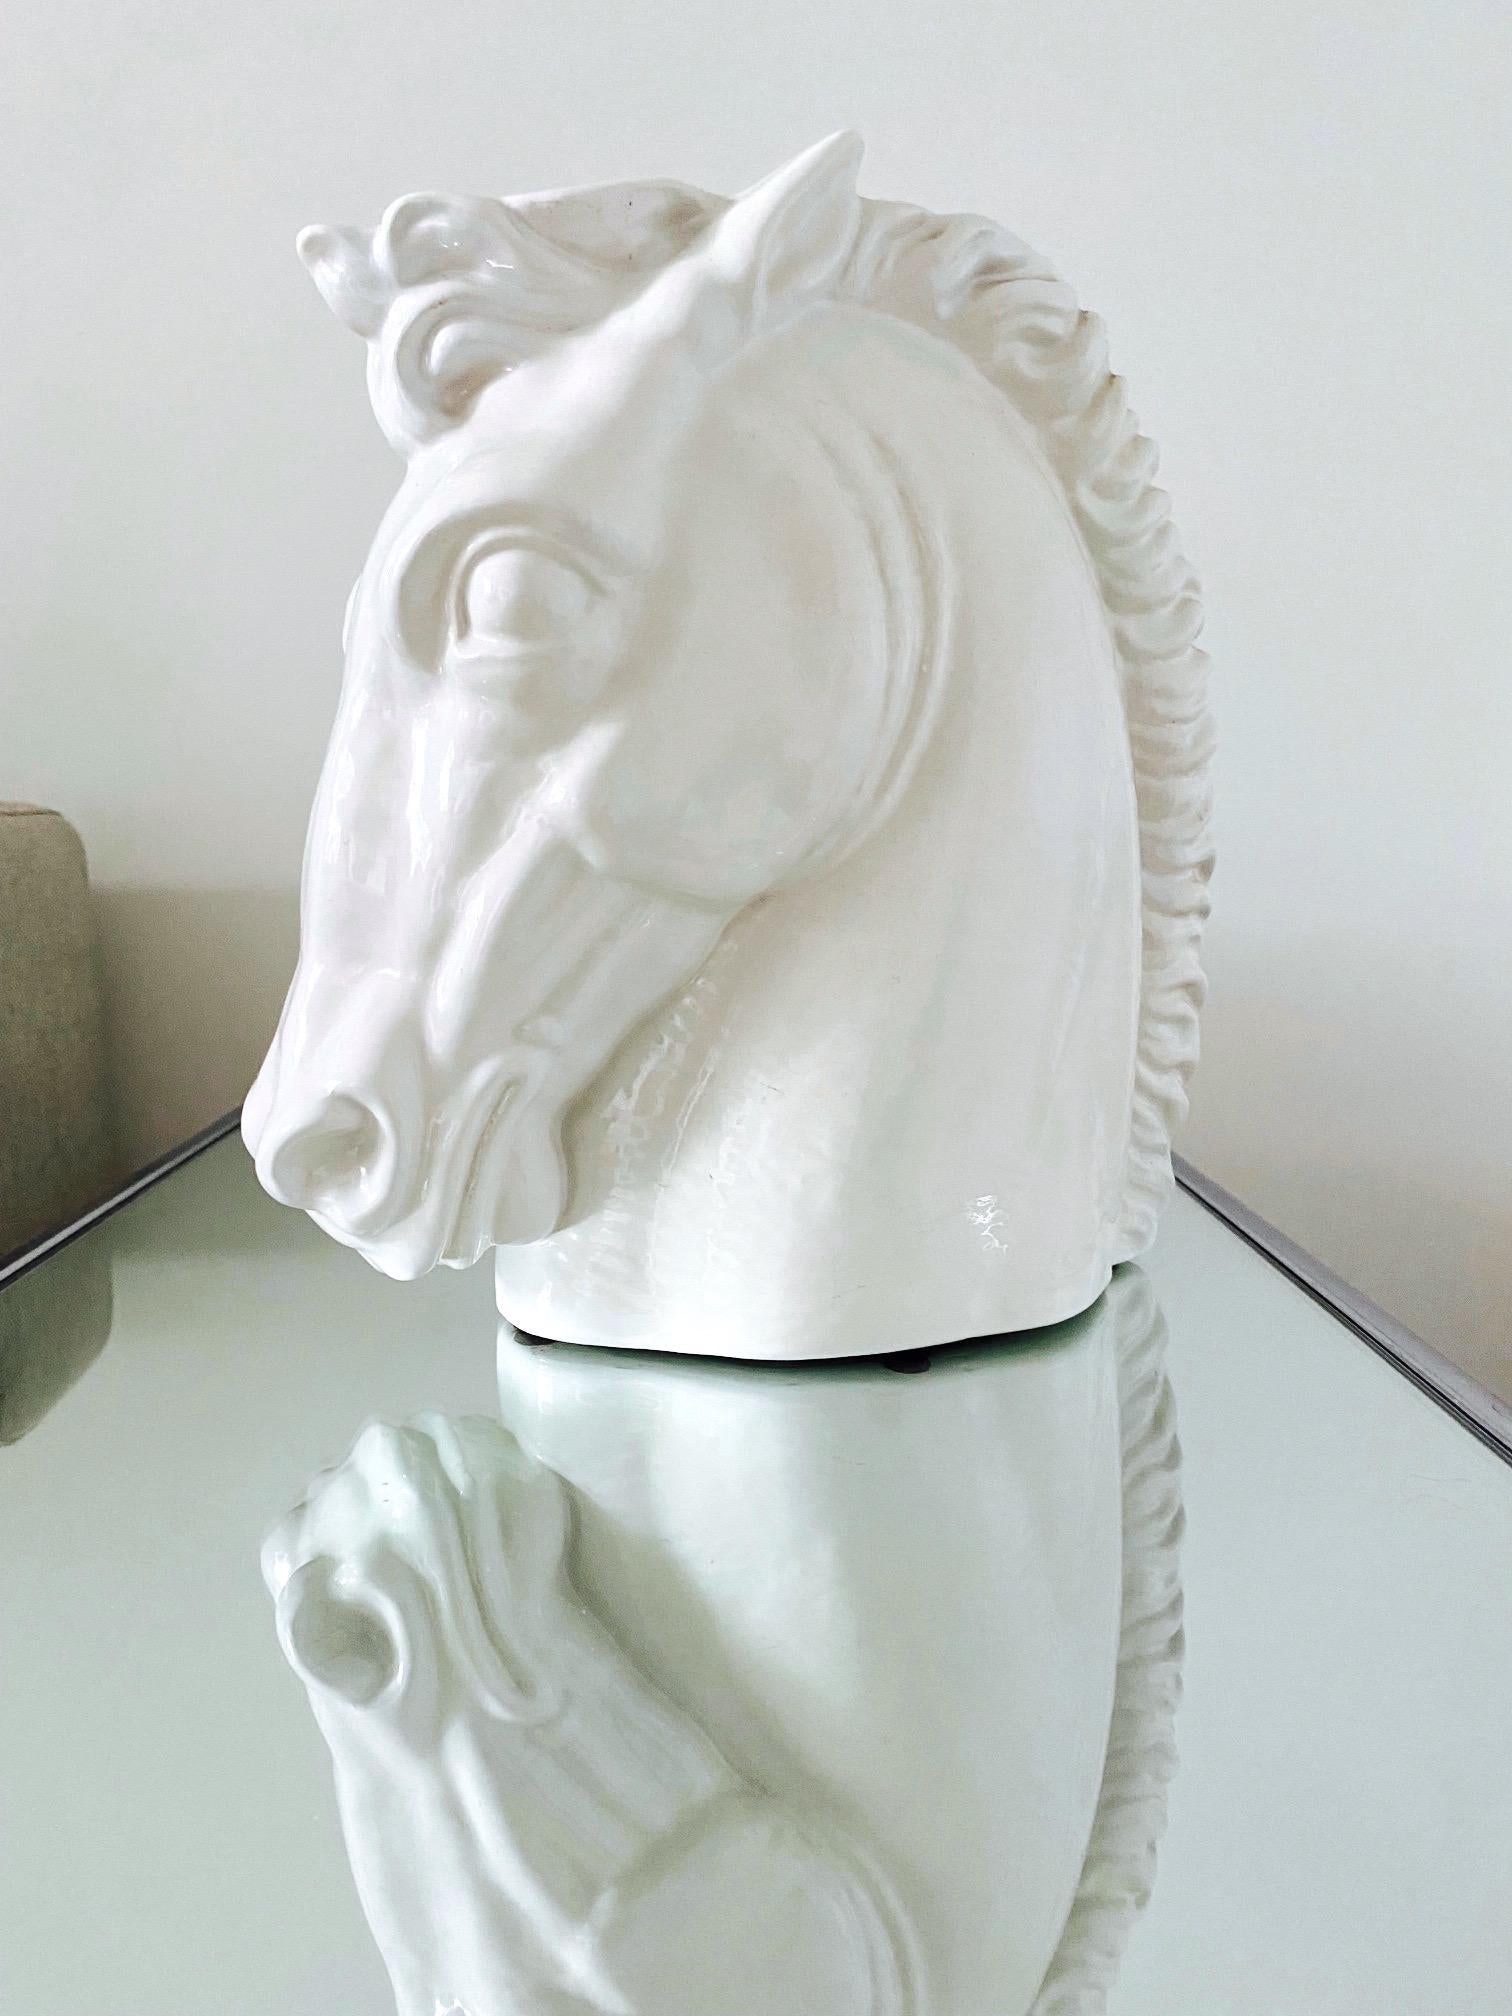 1970's Italian bust of a horse head with a white glazed finish. The handcrafted stallion has a realist features inspired by the highly stylized details of the Art Deco Era. The striking piece is beautiful from all angles. It can be used as a